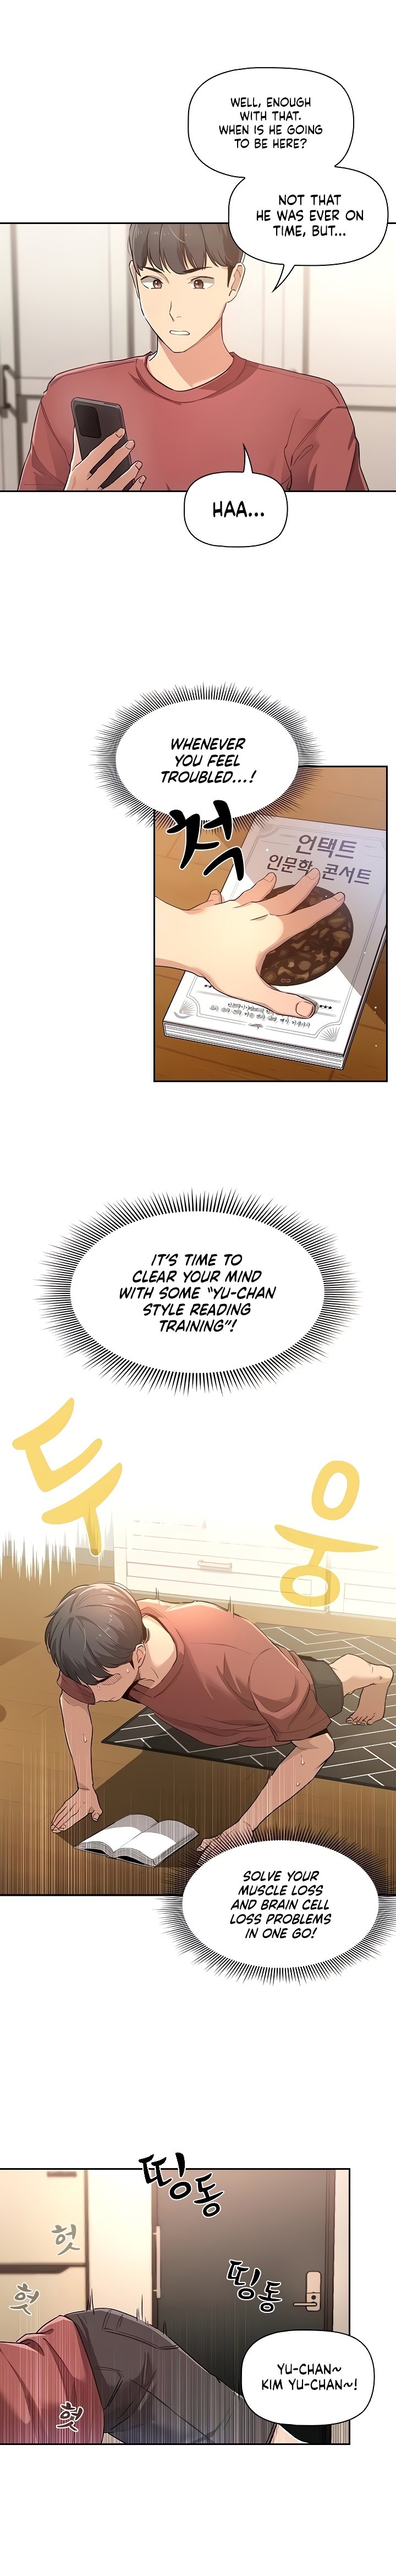 Private Tutoring in These Trying Times - Chapter 1 Page 2